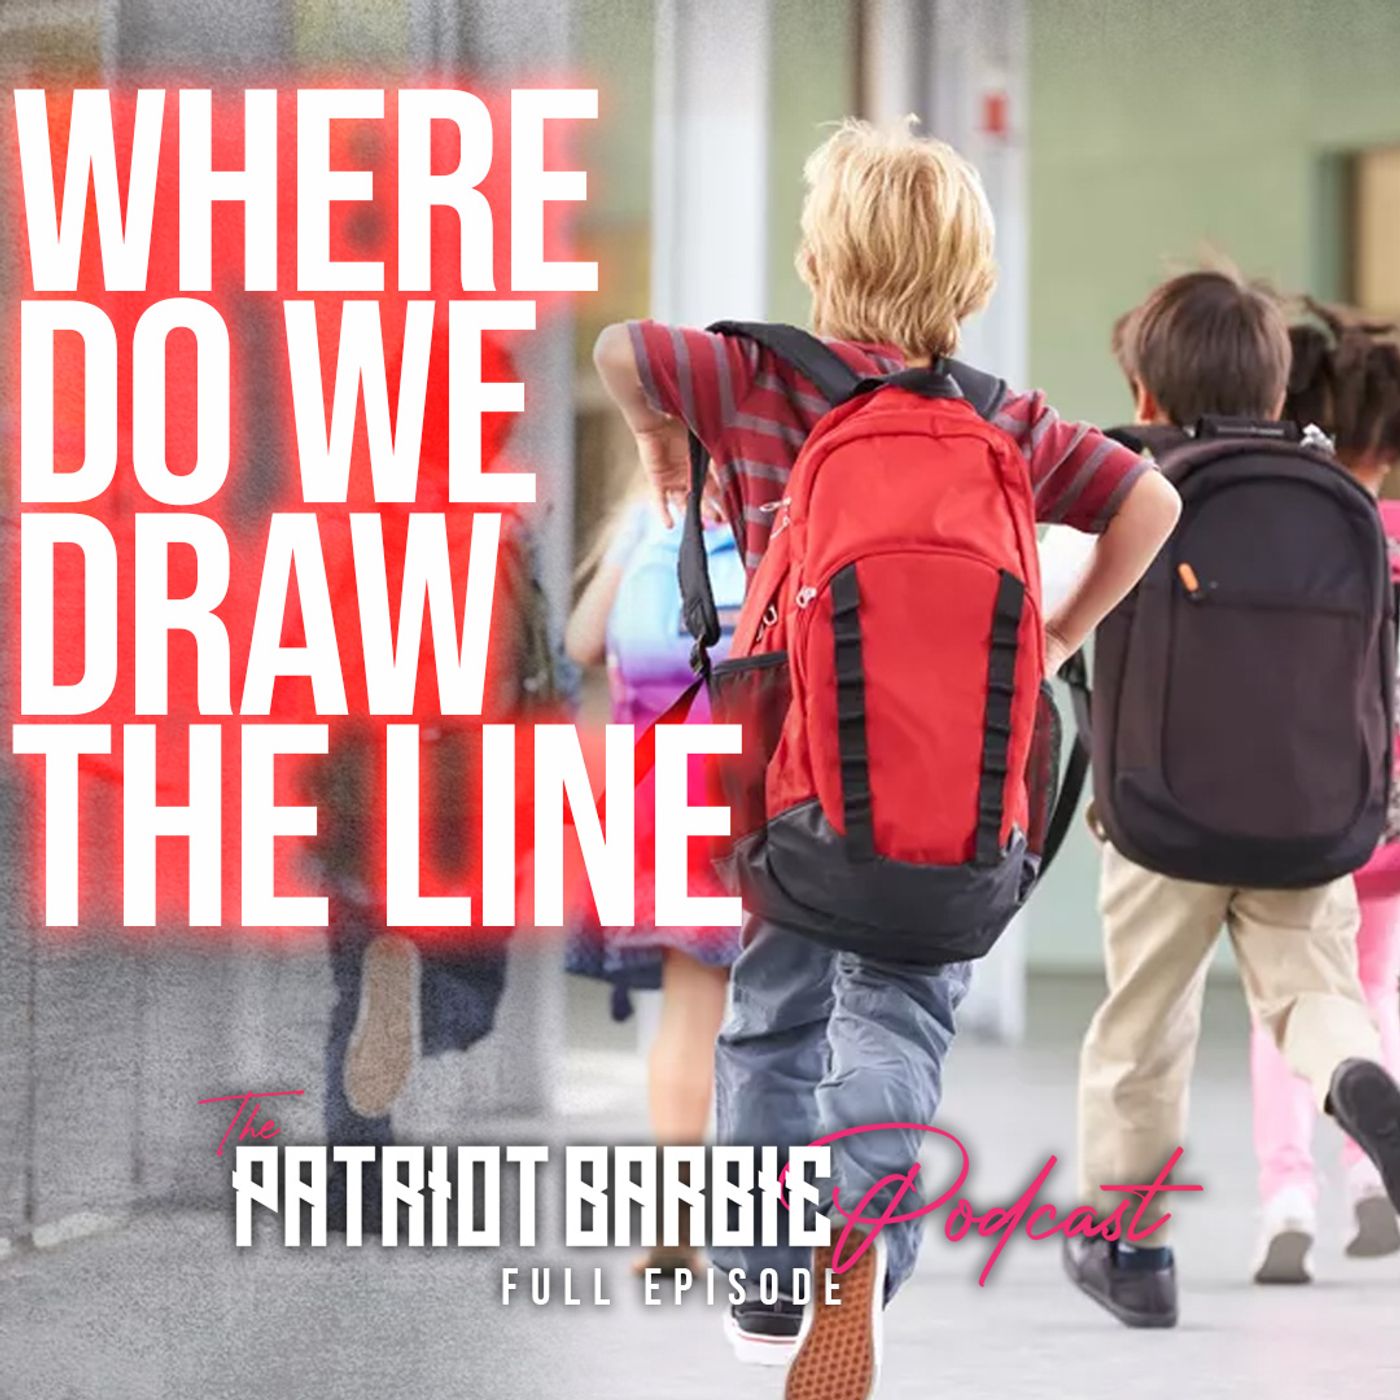 Breaking Chains in the School System | Jessica Tapia x Patriot Barbie